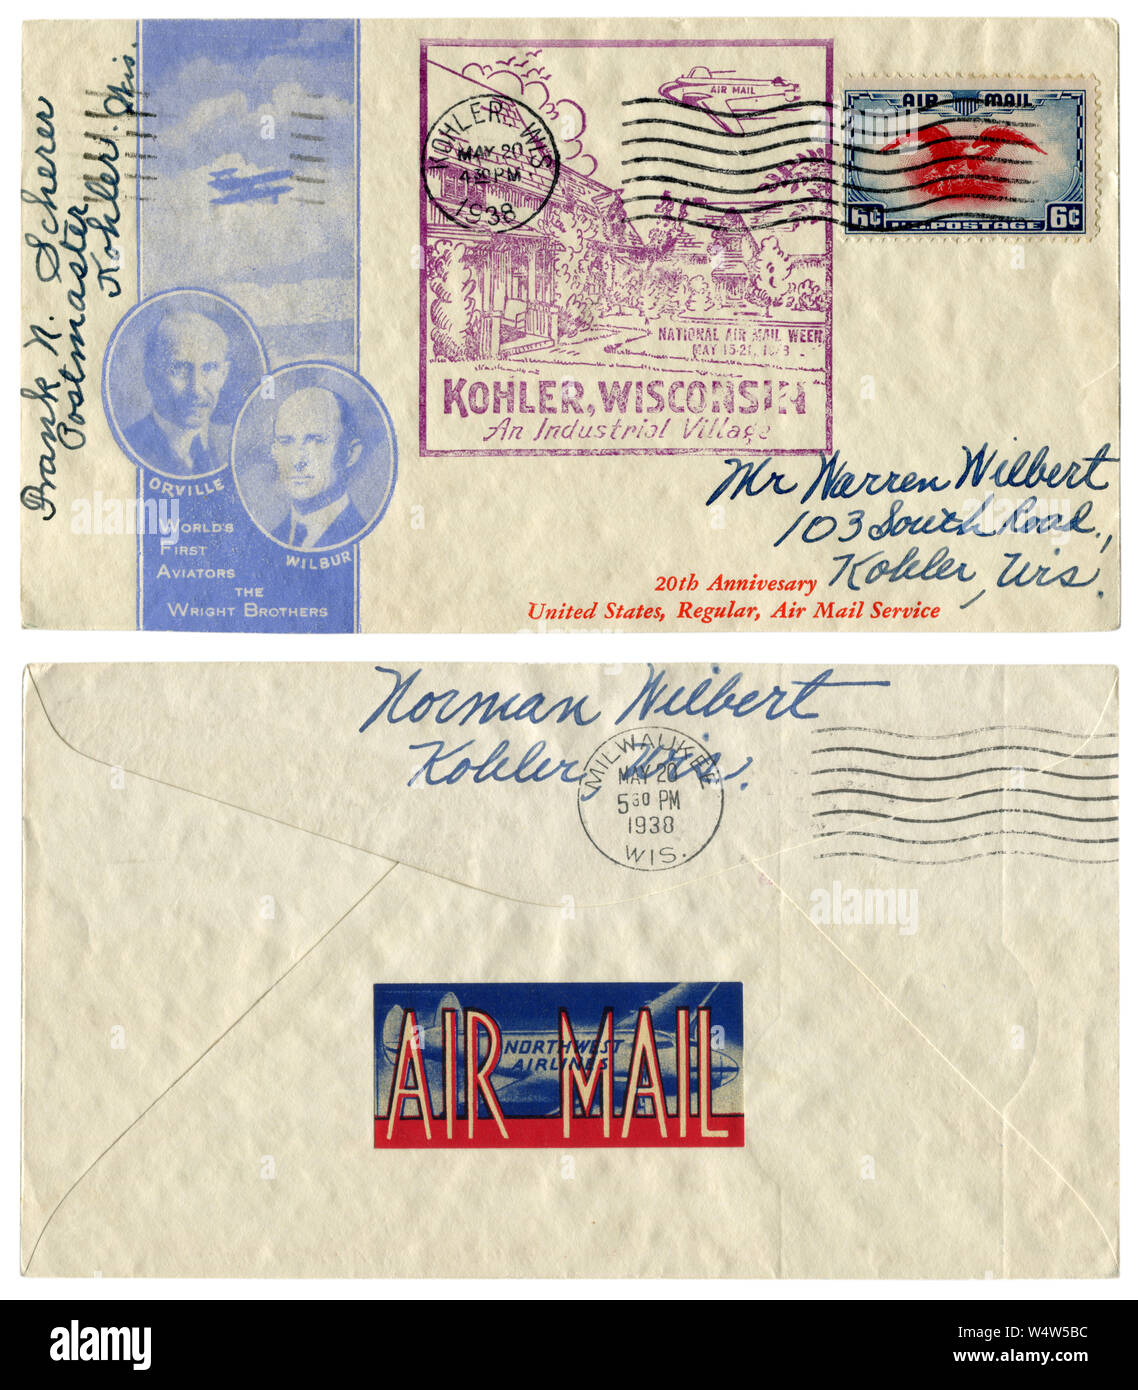 Kohler, Wisconsin, The USA, 20 May 1938: US historical envelope: cover with cachet The Wright Brothers. World's first Aviators. National Air Mail Week Stock Photo